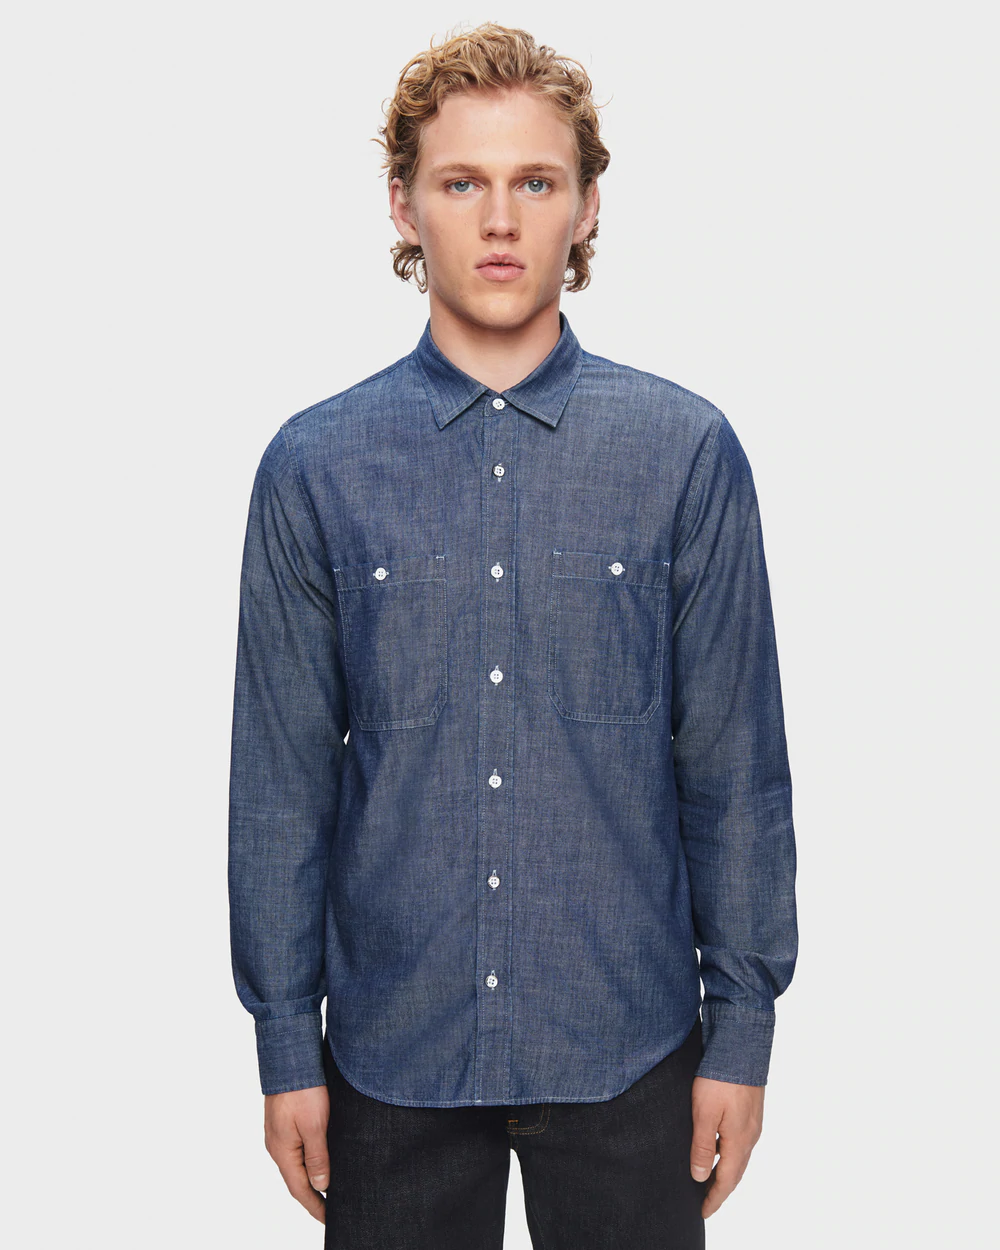 The Best Chambray Shirts Add Rugged Style To Your Spring Wardrobe - Maxim